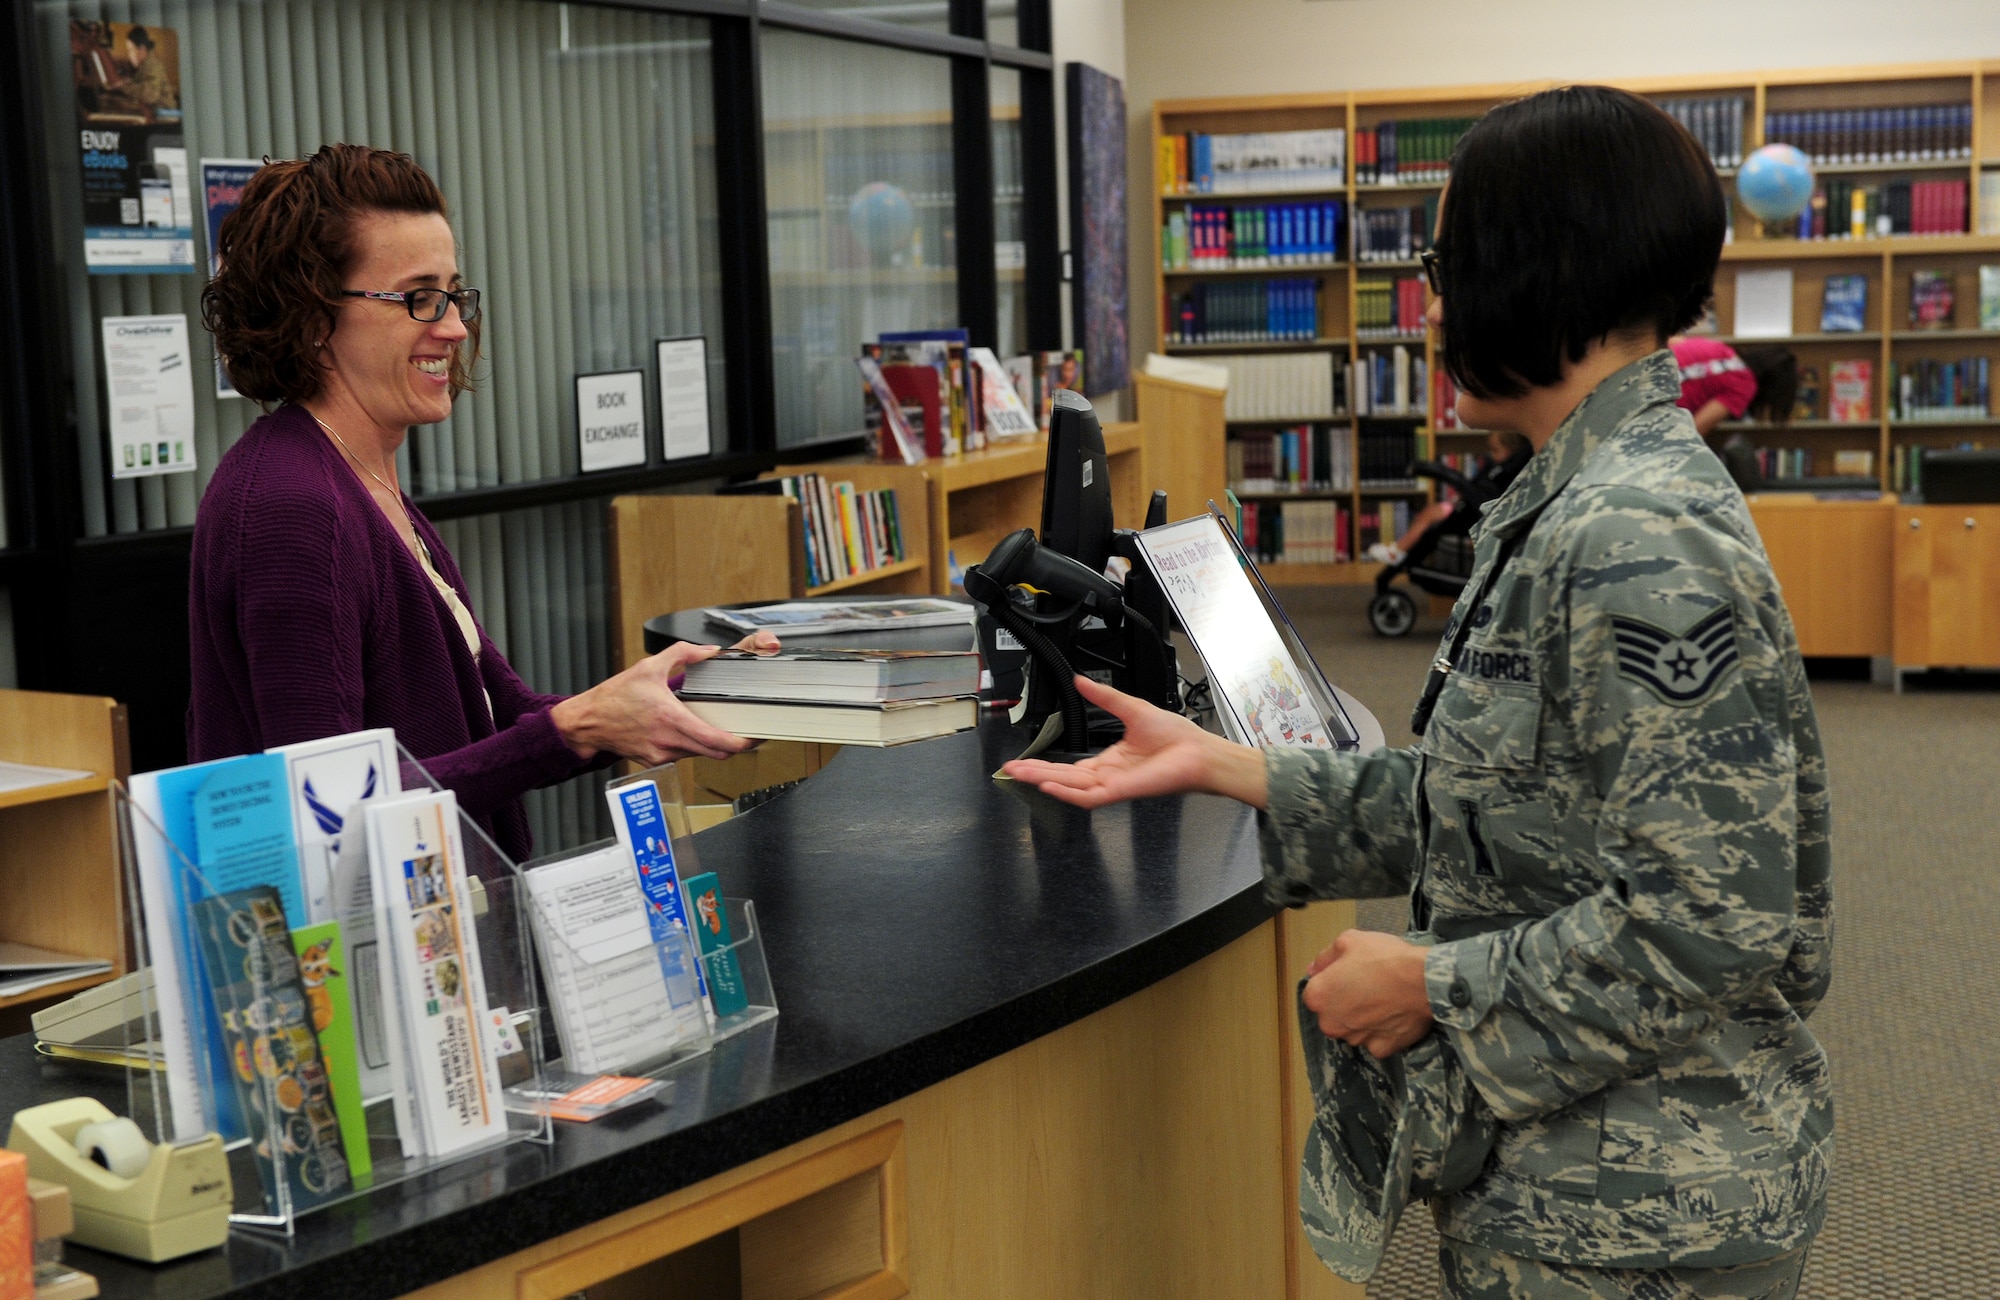 Air Force Staff Sgt. Krystal Malveaux, 509th Aircraft Maintenance Squadron weapons specialist, returns books to Anne Neudorf, 509th Force Support Squadron library aid, July 28, 2015, at Whiteman Air Force Base, Mo. For patrons ages 10 and older, library cards are freely available and can be used to check out items, as well as access the vast entirety of online resources. (U.S. Air Force photo by Airman 1st Class Jazmin Smith/Released)